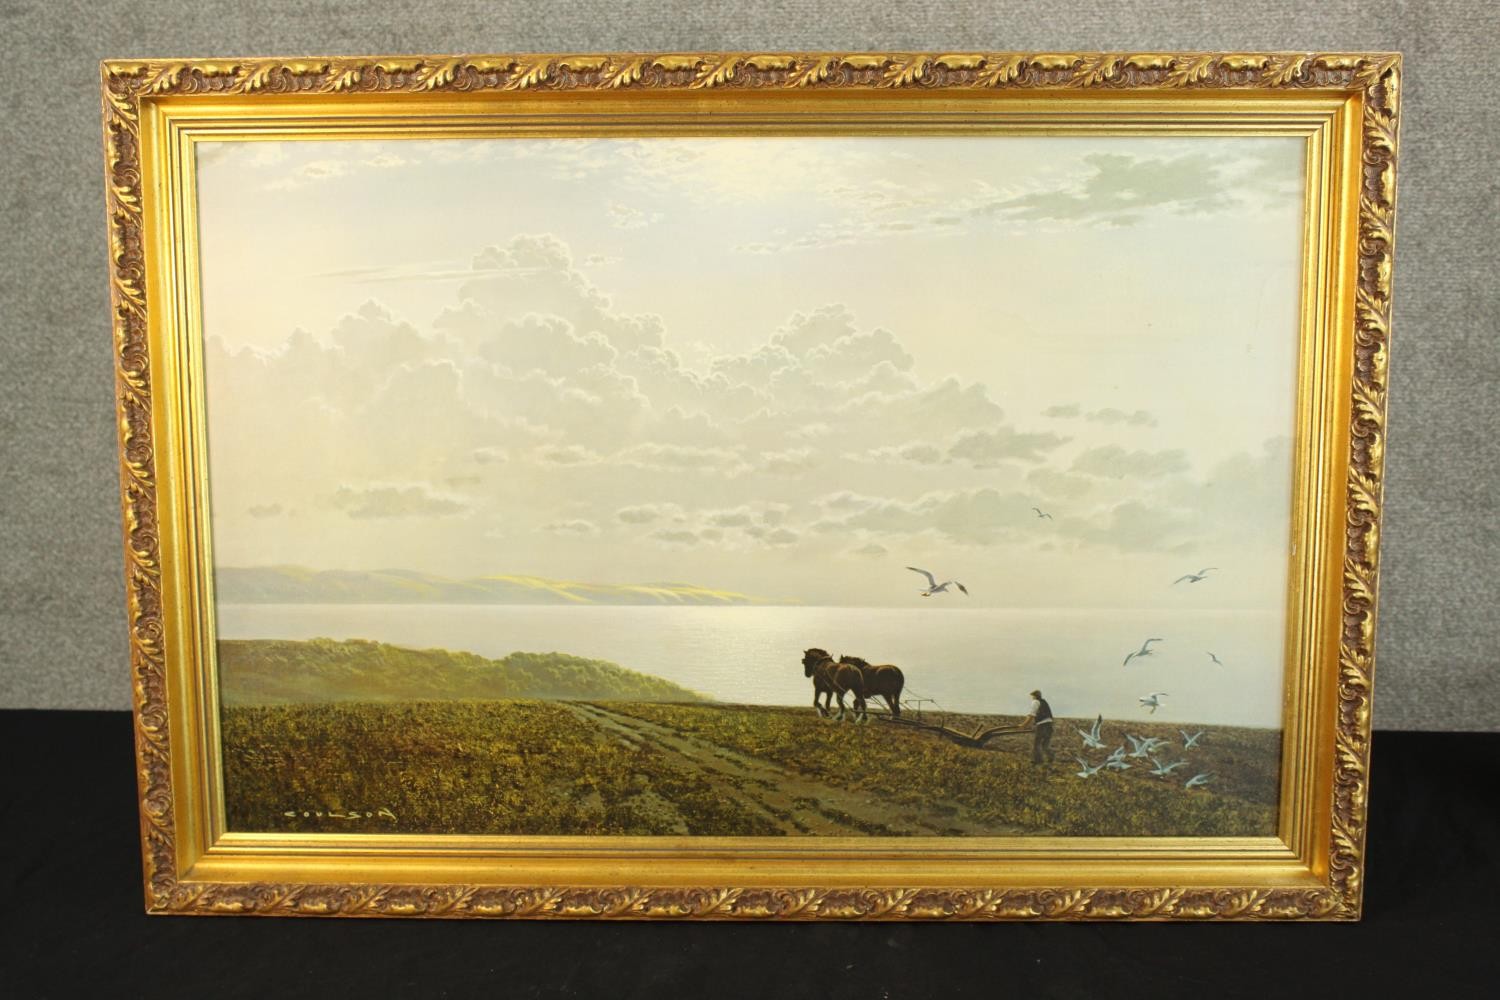 A framed landscape print showing a horse and plough. H.57 x W.82 cm. - Image 2 of 4